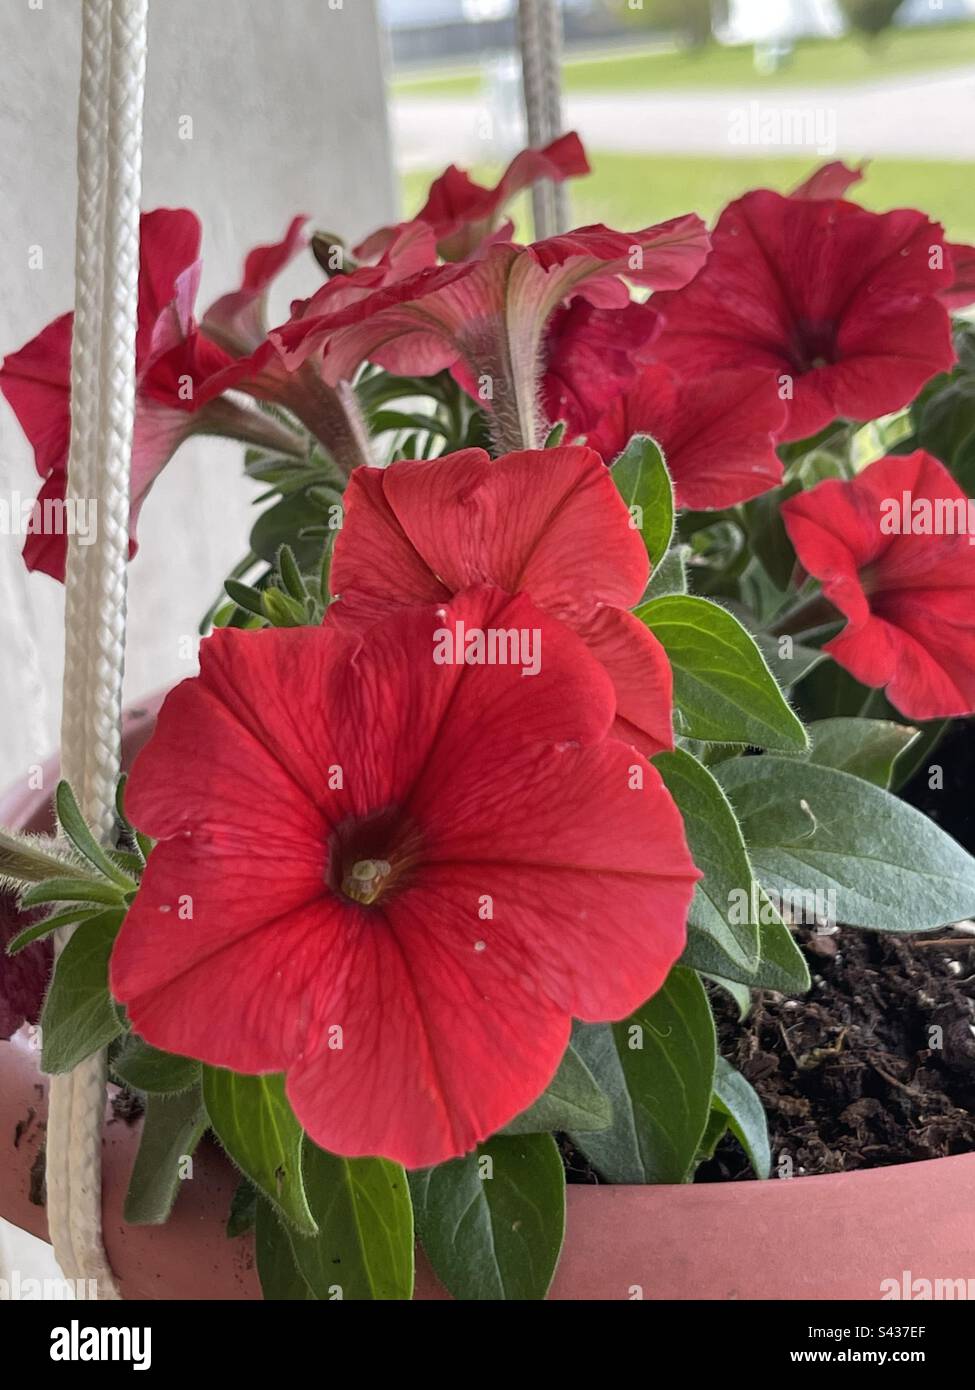 Red petunias in a hanging pot. Stock Photo